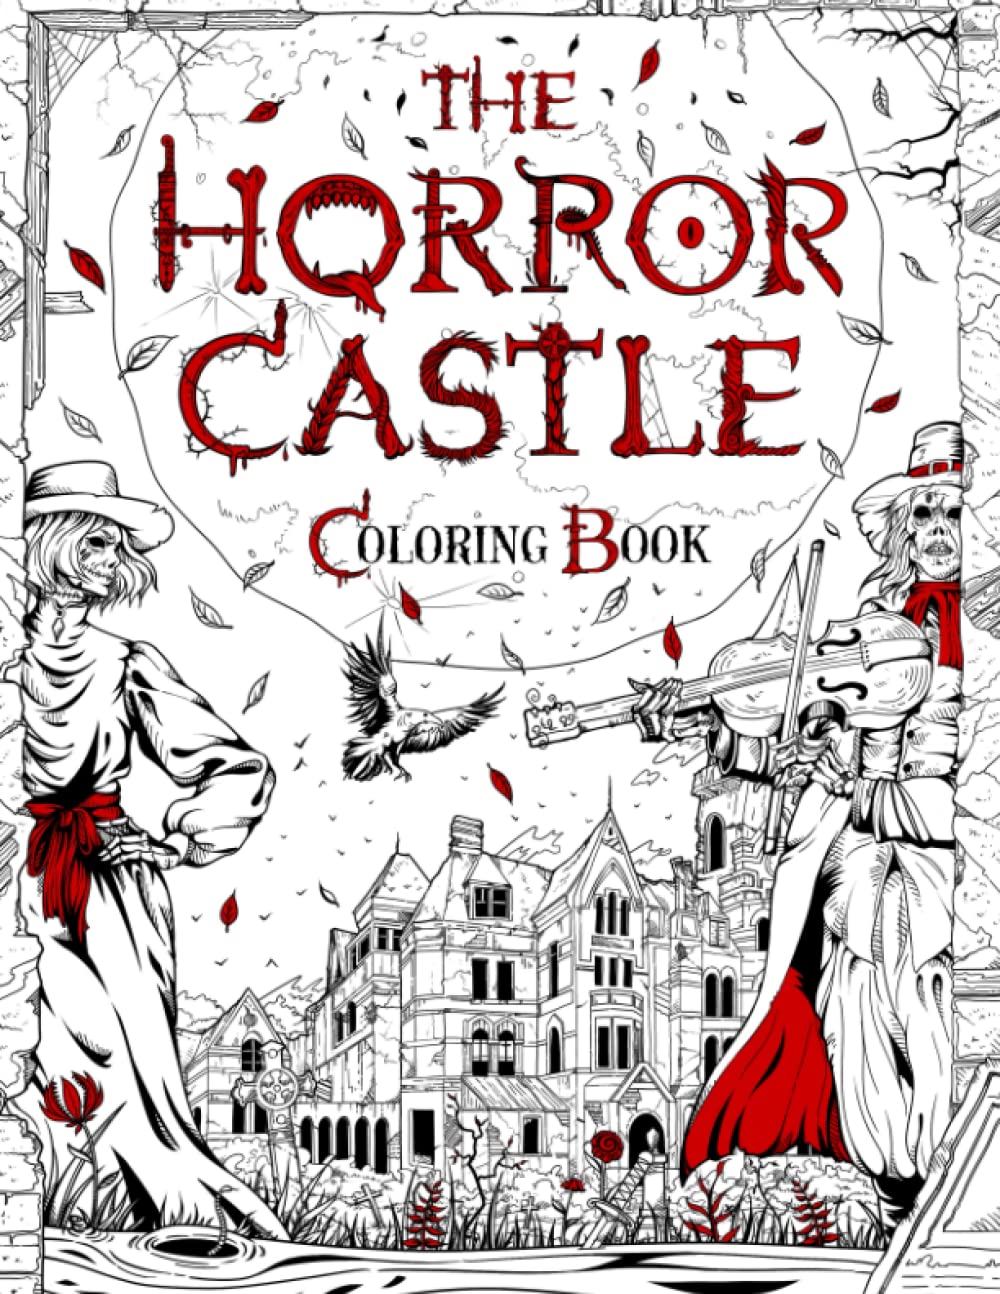 THE HORROR CASTLE: A Creepy and Spine-Chilling Coloring Book For Adults. Dead But Not Buried Are Waiting Inside... (Horror and Scary Gifts)